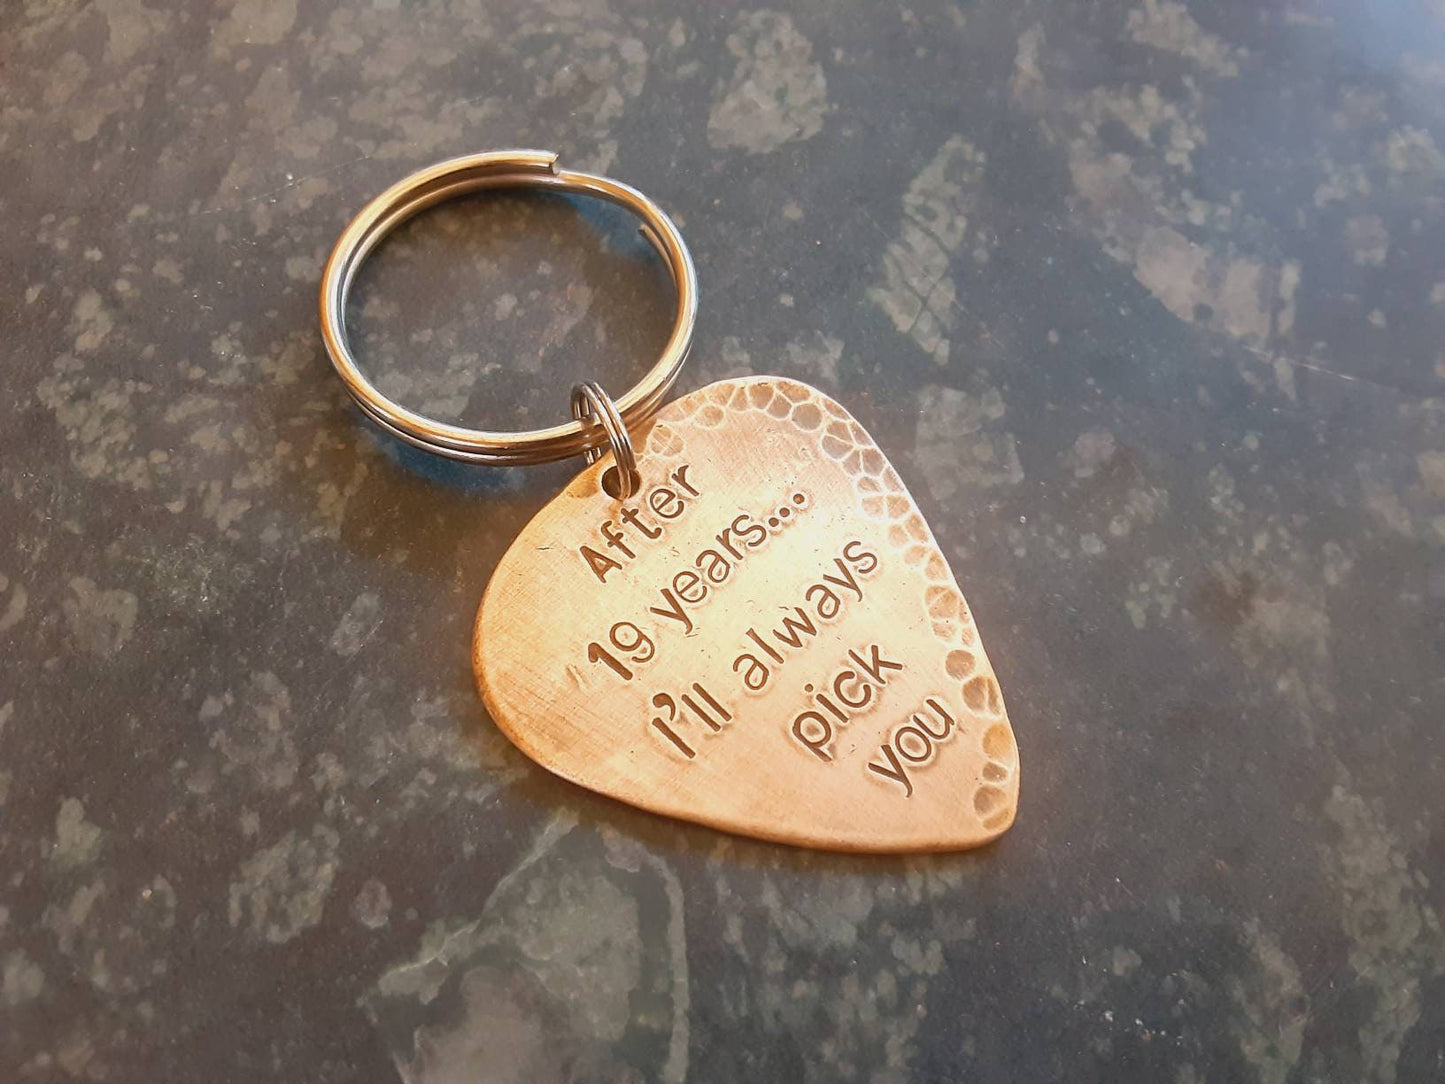 Bronze guitar pick keyring -a gift idea for 8th or 19th anniversary